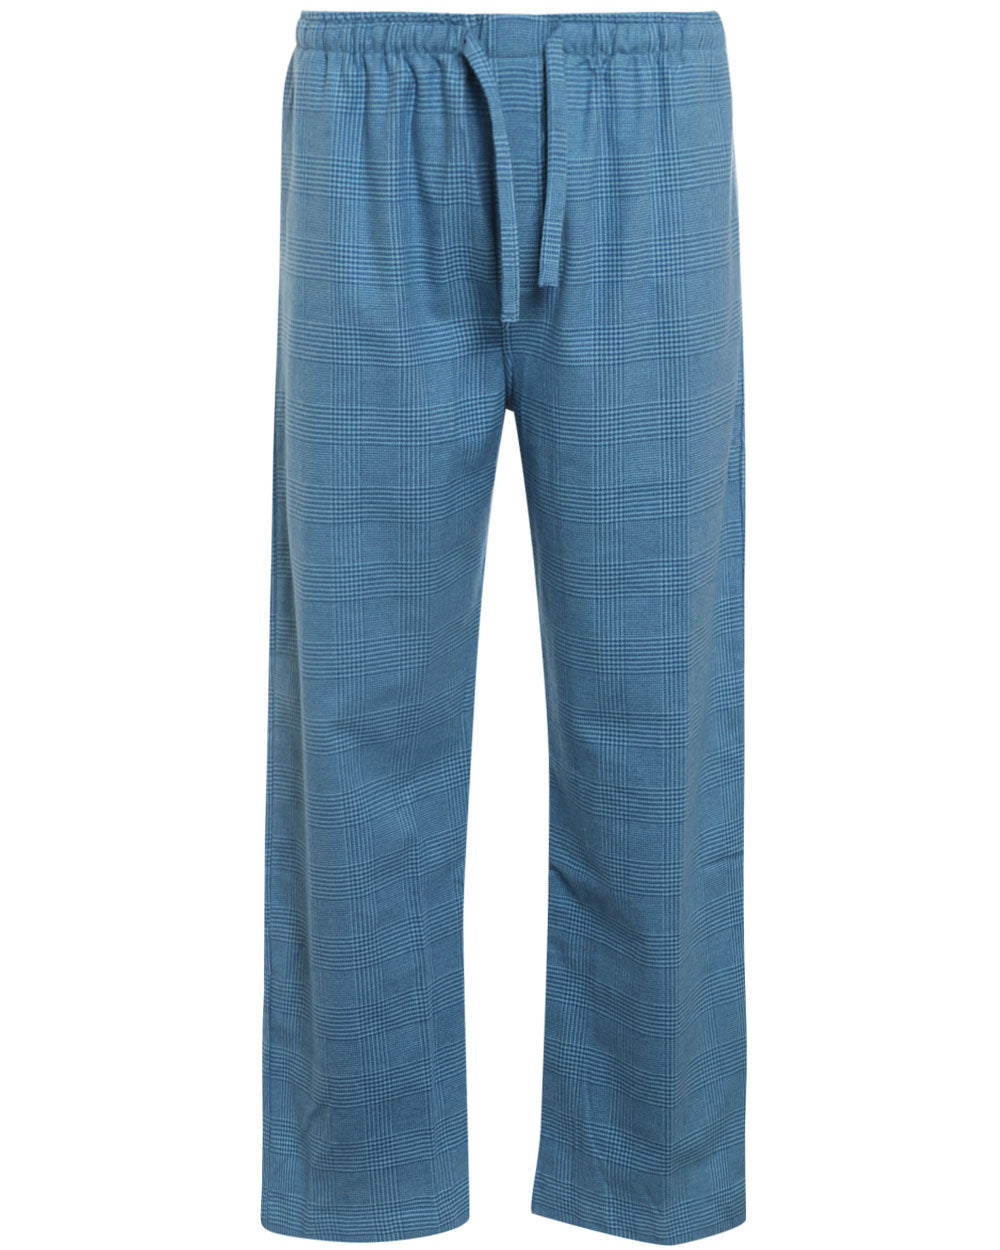 Light Blue and Mid Blue Houndstooth Woven Cotton Pajama Pant